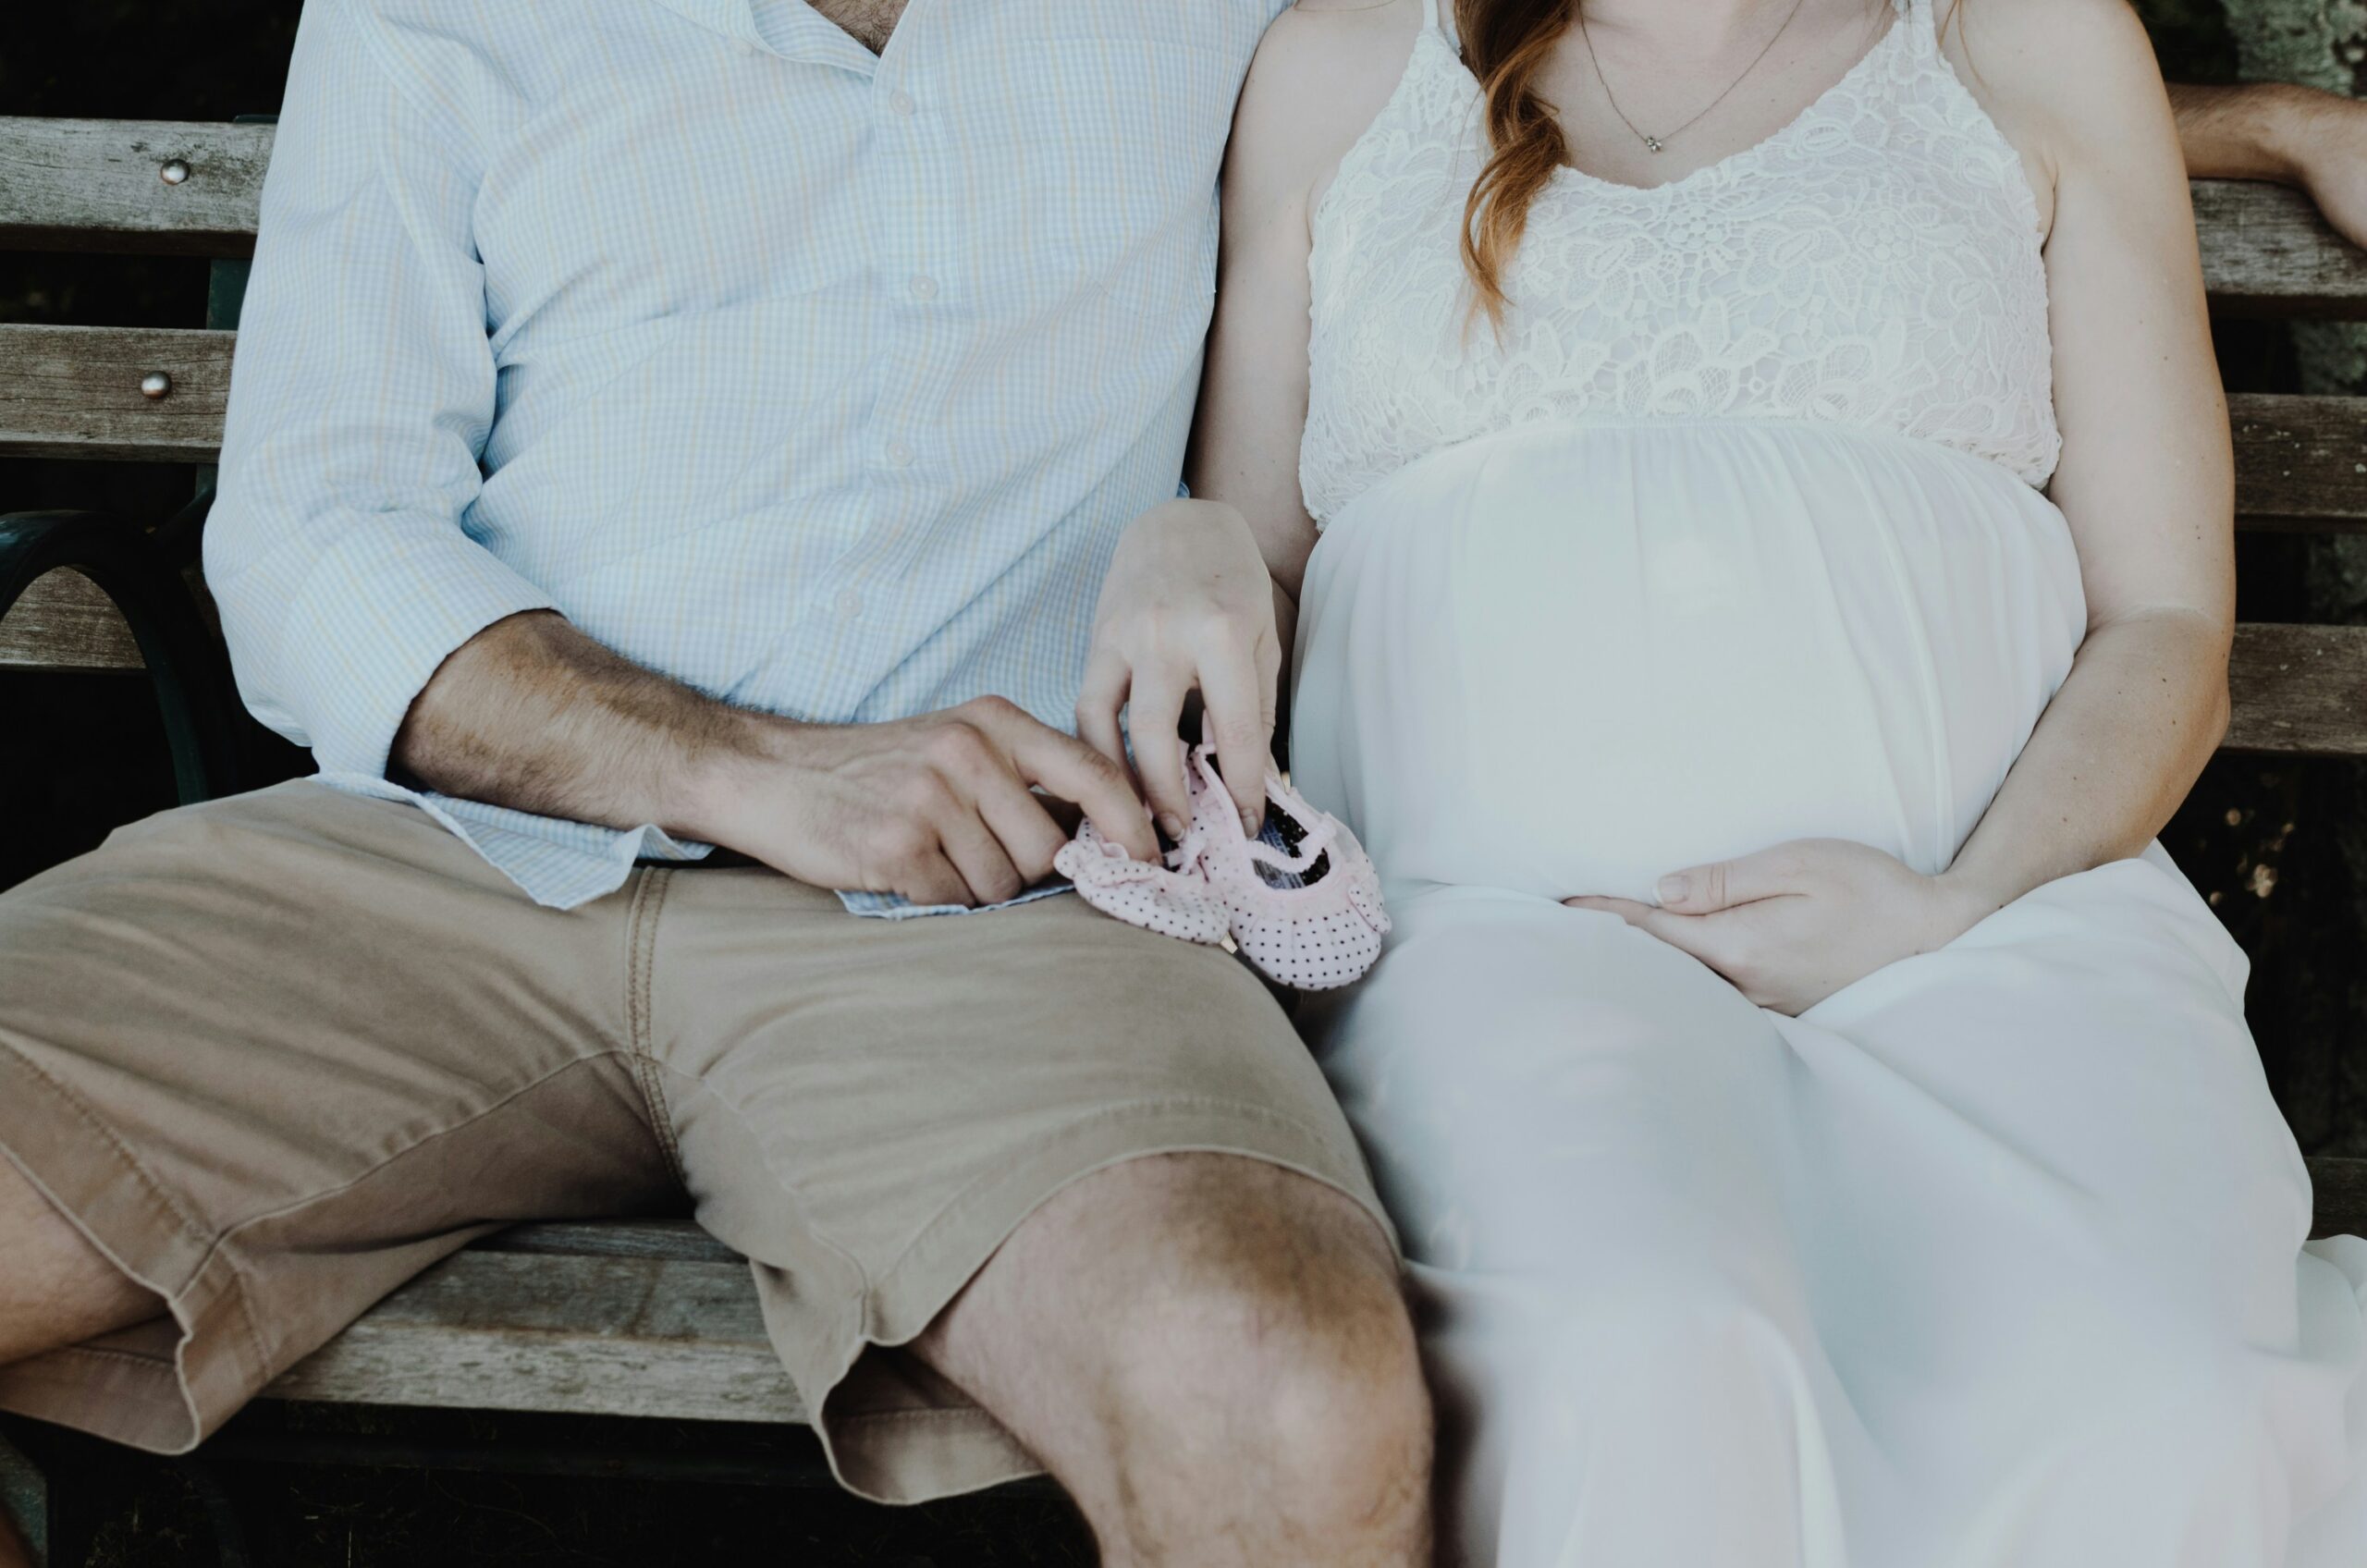 Pregnancy and Relationships: Changes with Your Partner, Family, and Friends